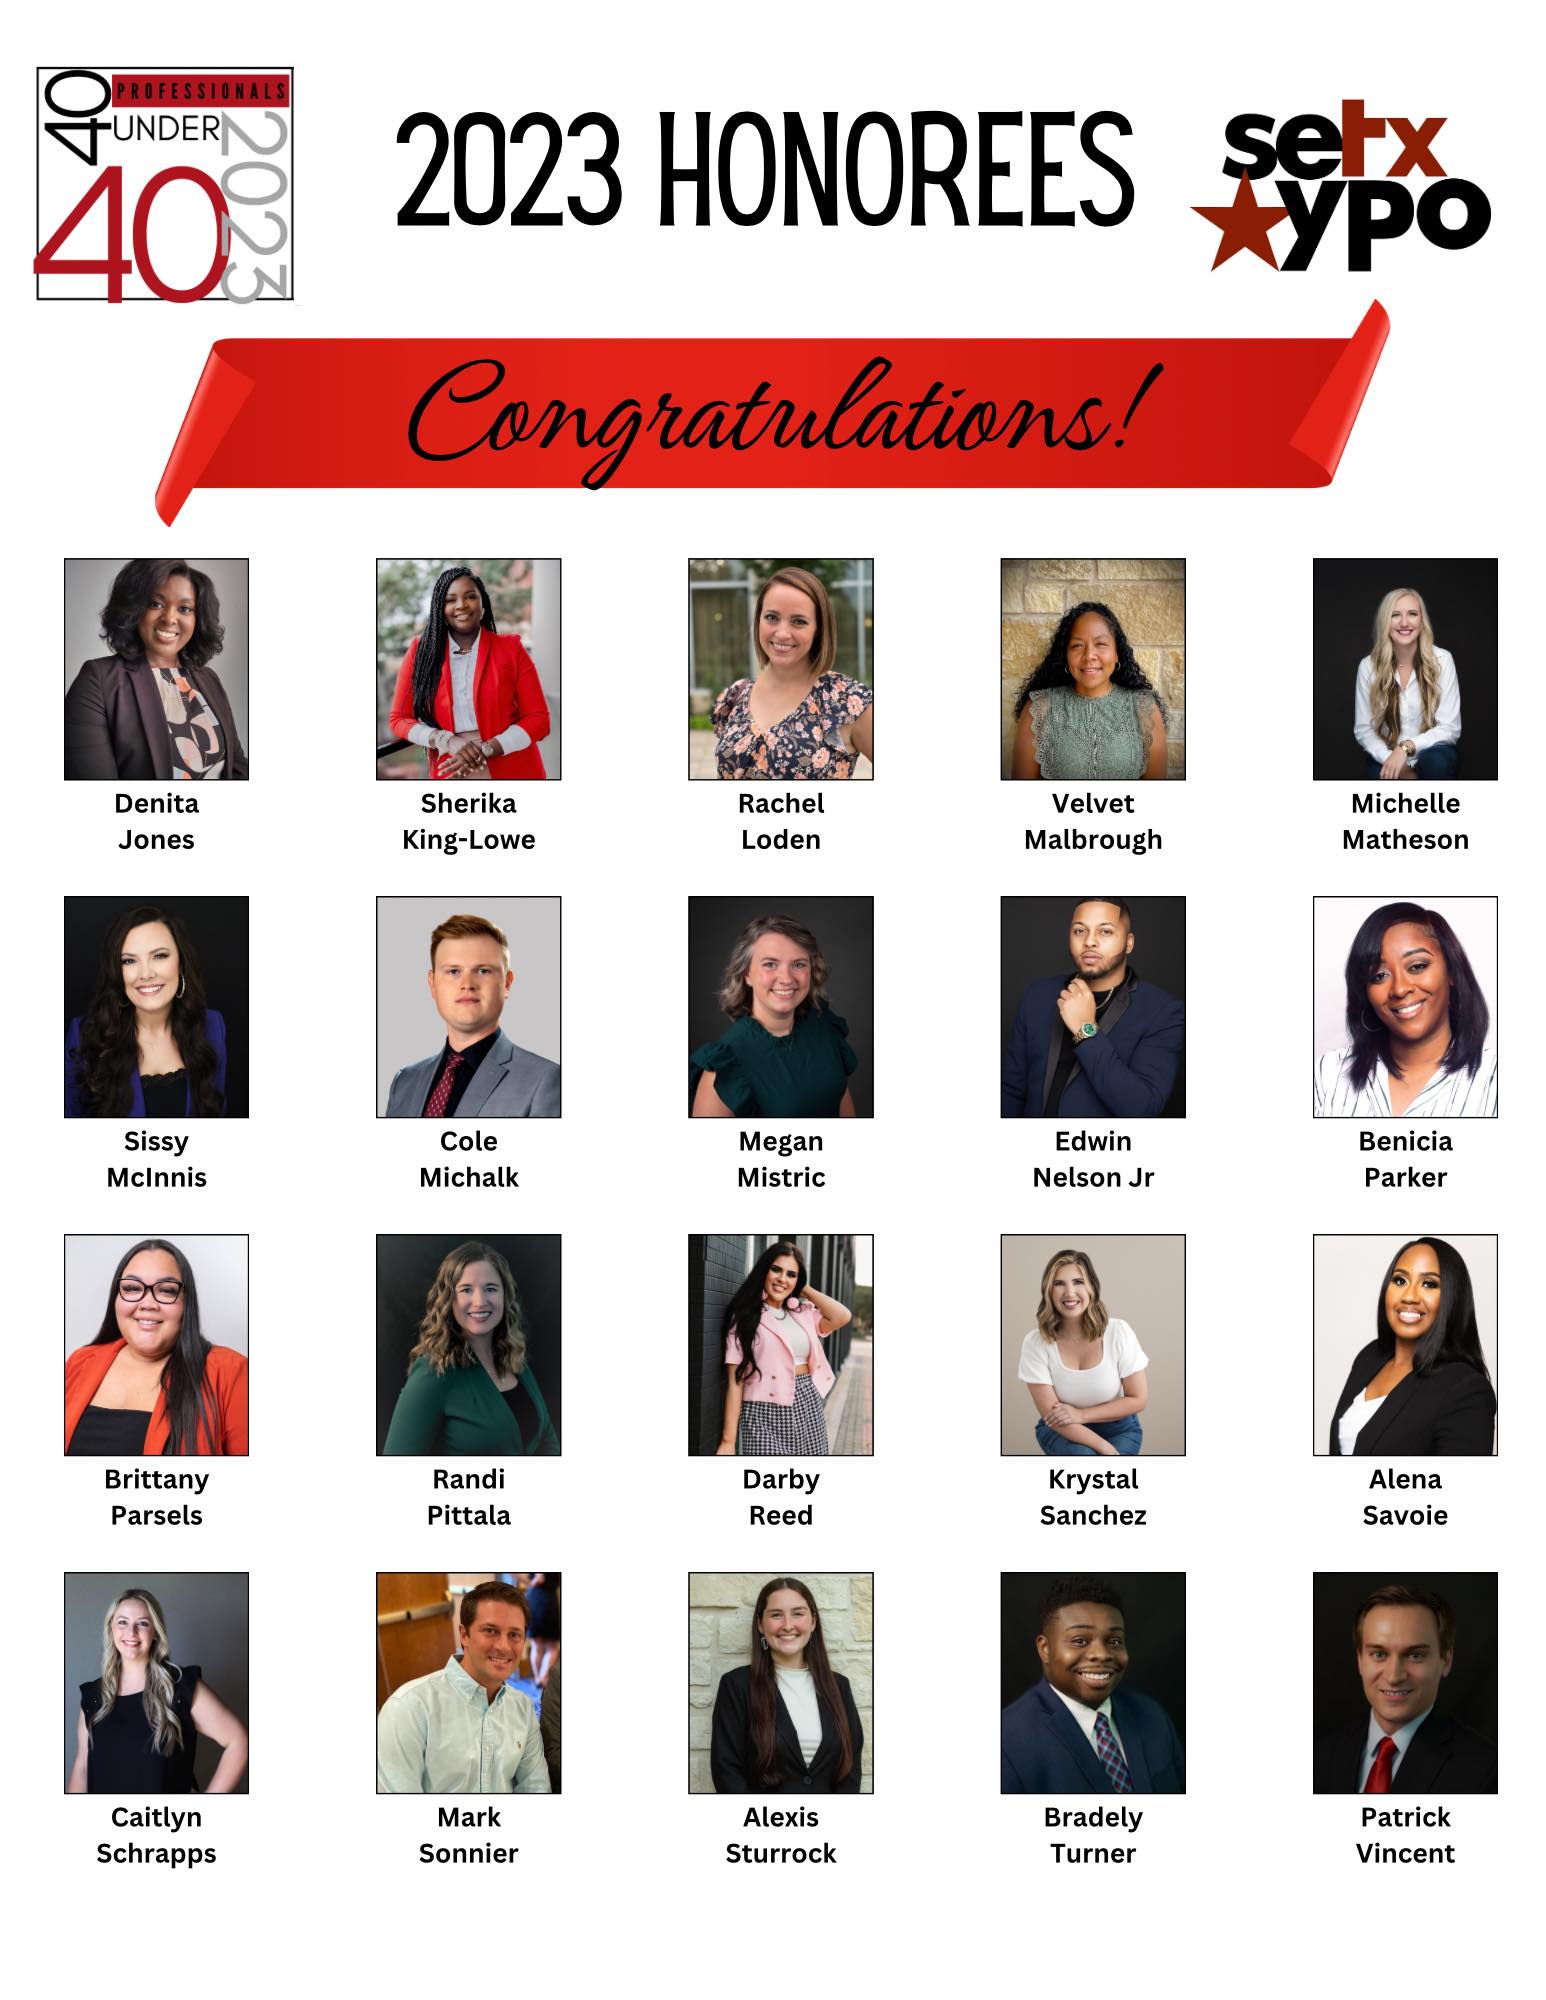 Another collage of 40 under 40 recipients